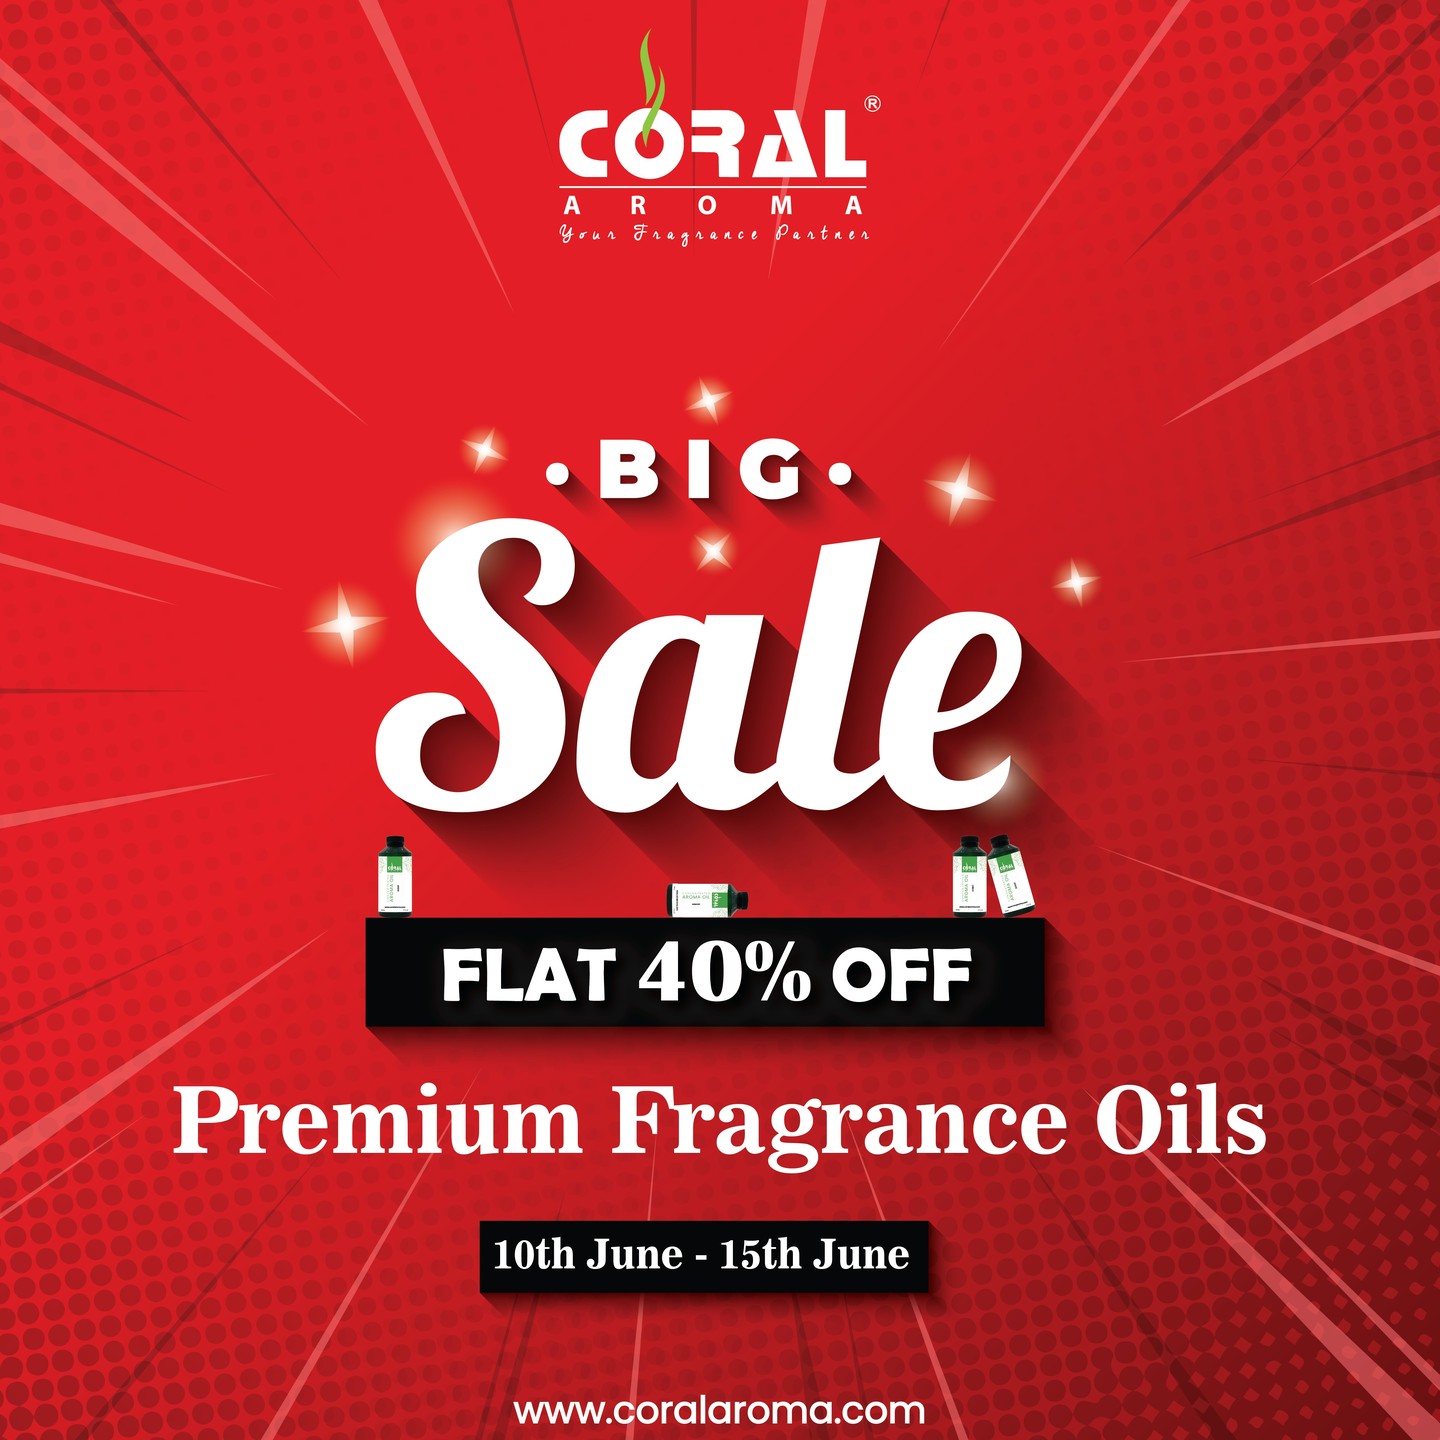 💚 Big Sale 💚 is back!!! 40% price drop on all our Premium Fragrances. Limited time offer. Get your favorite Premium Fragrance today. 

Explore our Premium Fragrances: 
https://www.coralaroma.com/product-category/deals-and-combo/

#offers #bigsale #weekendsale #pricedrop #aroma #scent #fragranceoils #perfumeoil #fragranceshop #fragranceoftheday #dubai #uae